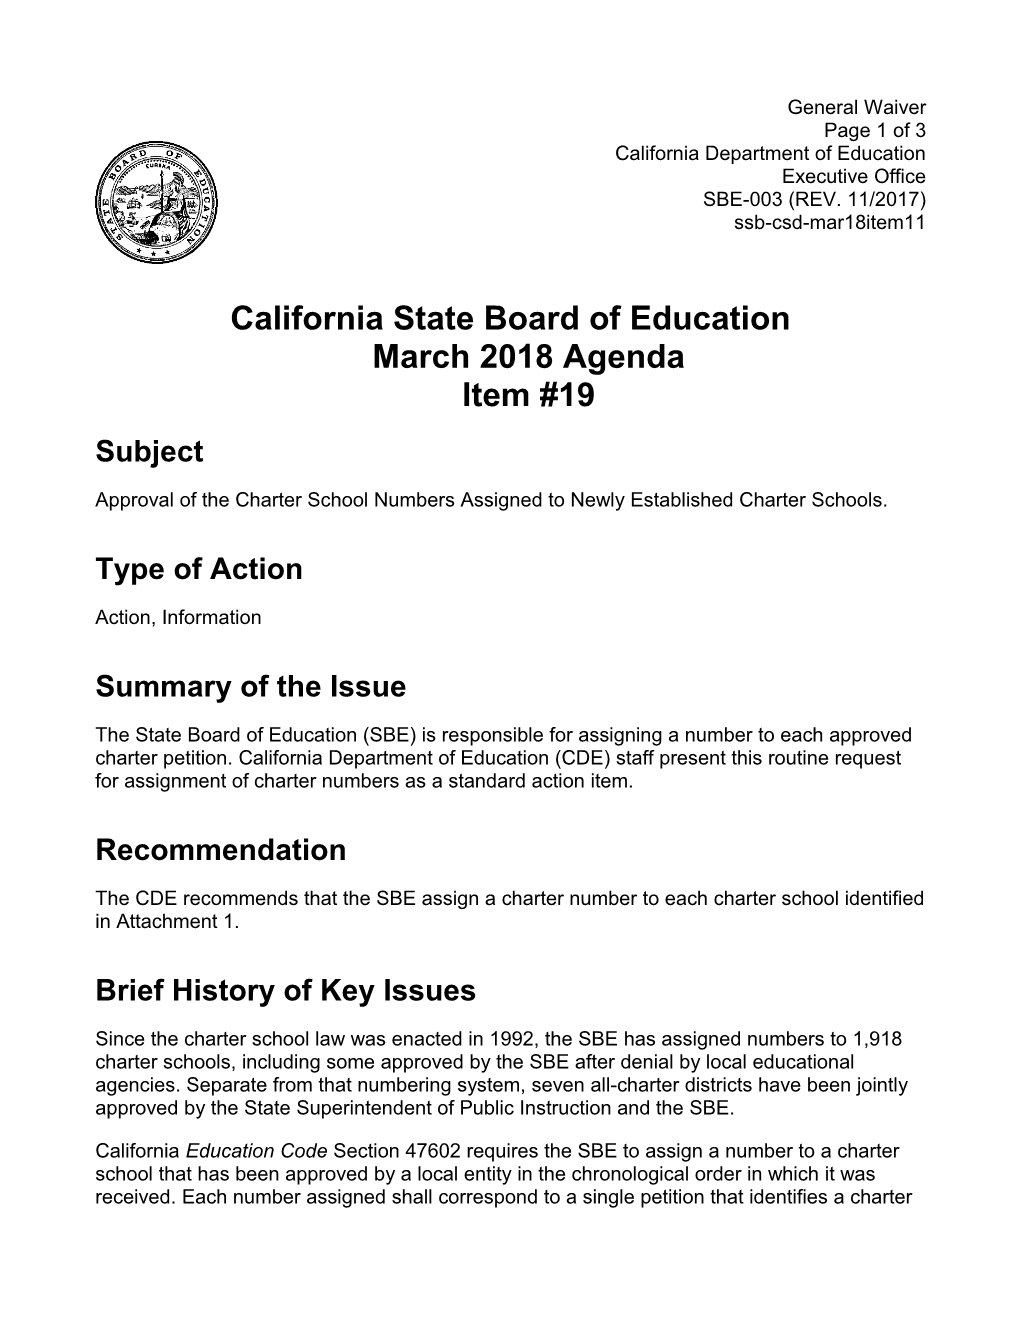 March 2018 Agenda Item 19 - Meeting Agendas (CA State Board of Education)